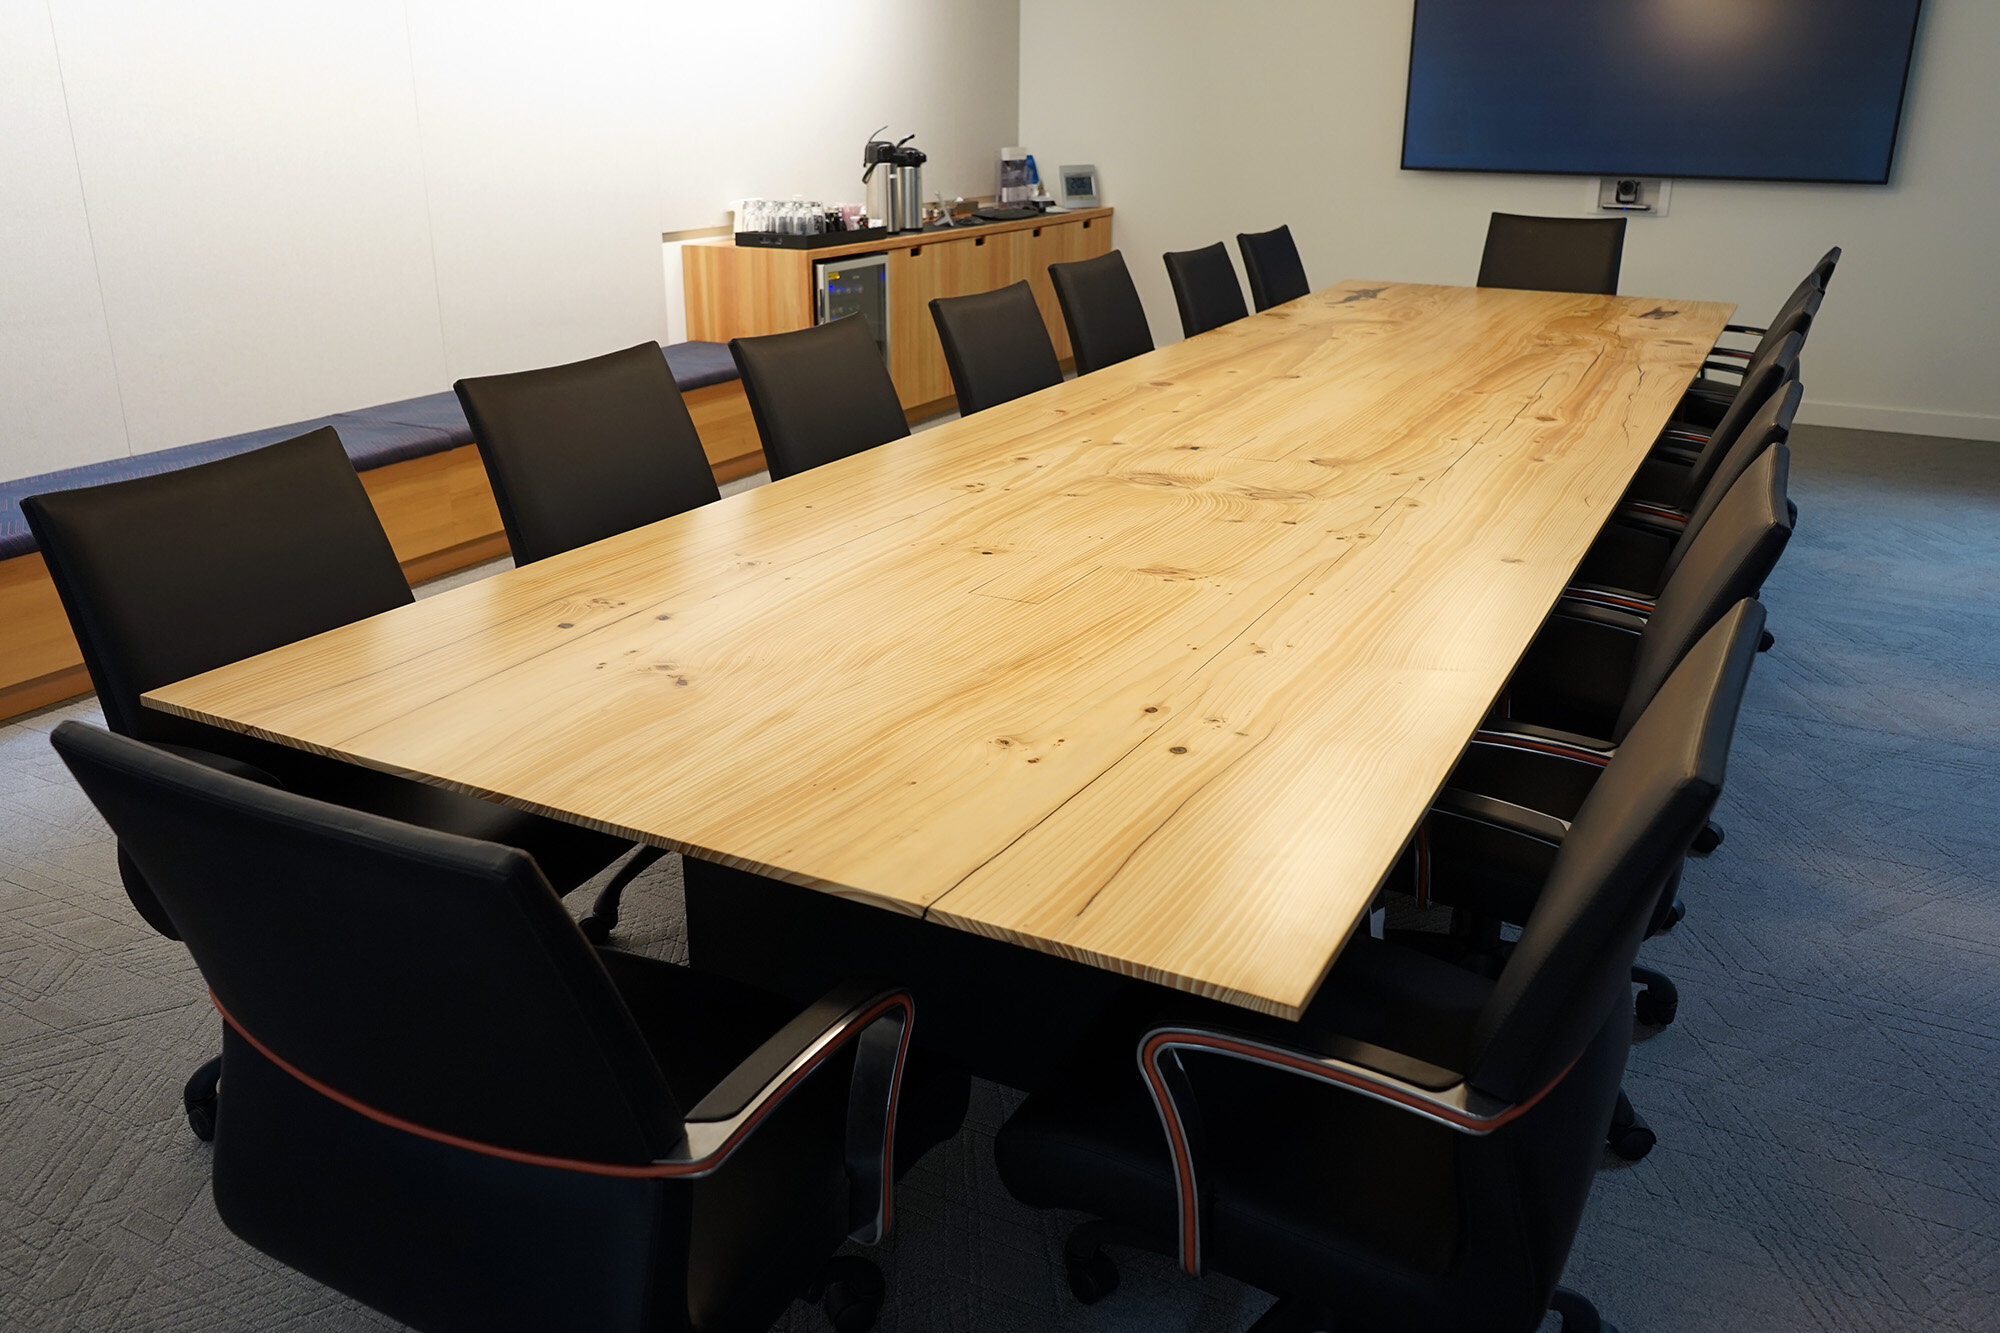 01 Fritz Conference Table Overall.jpg